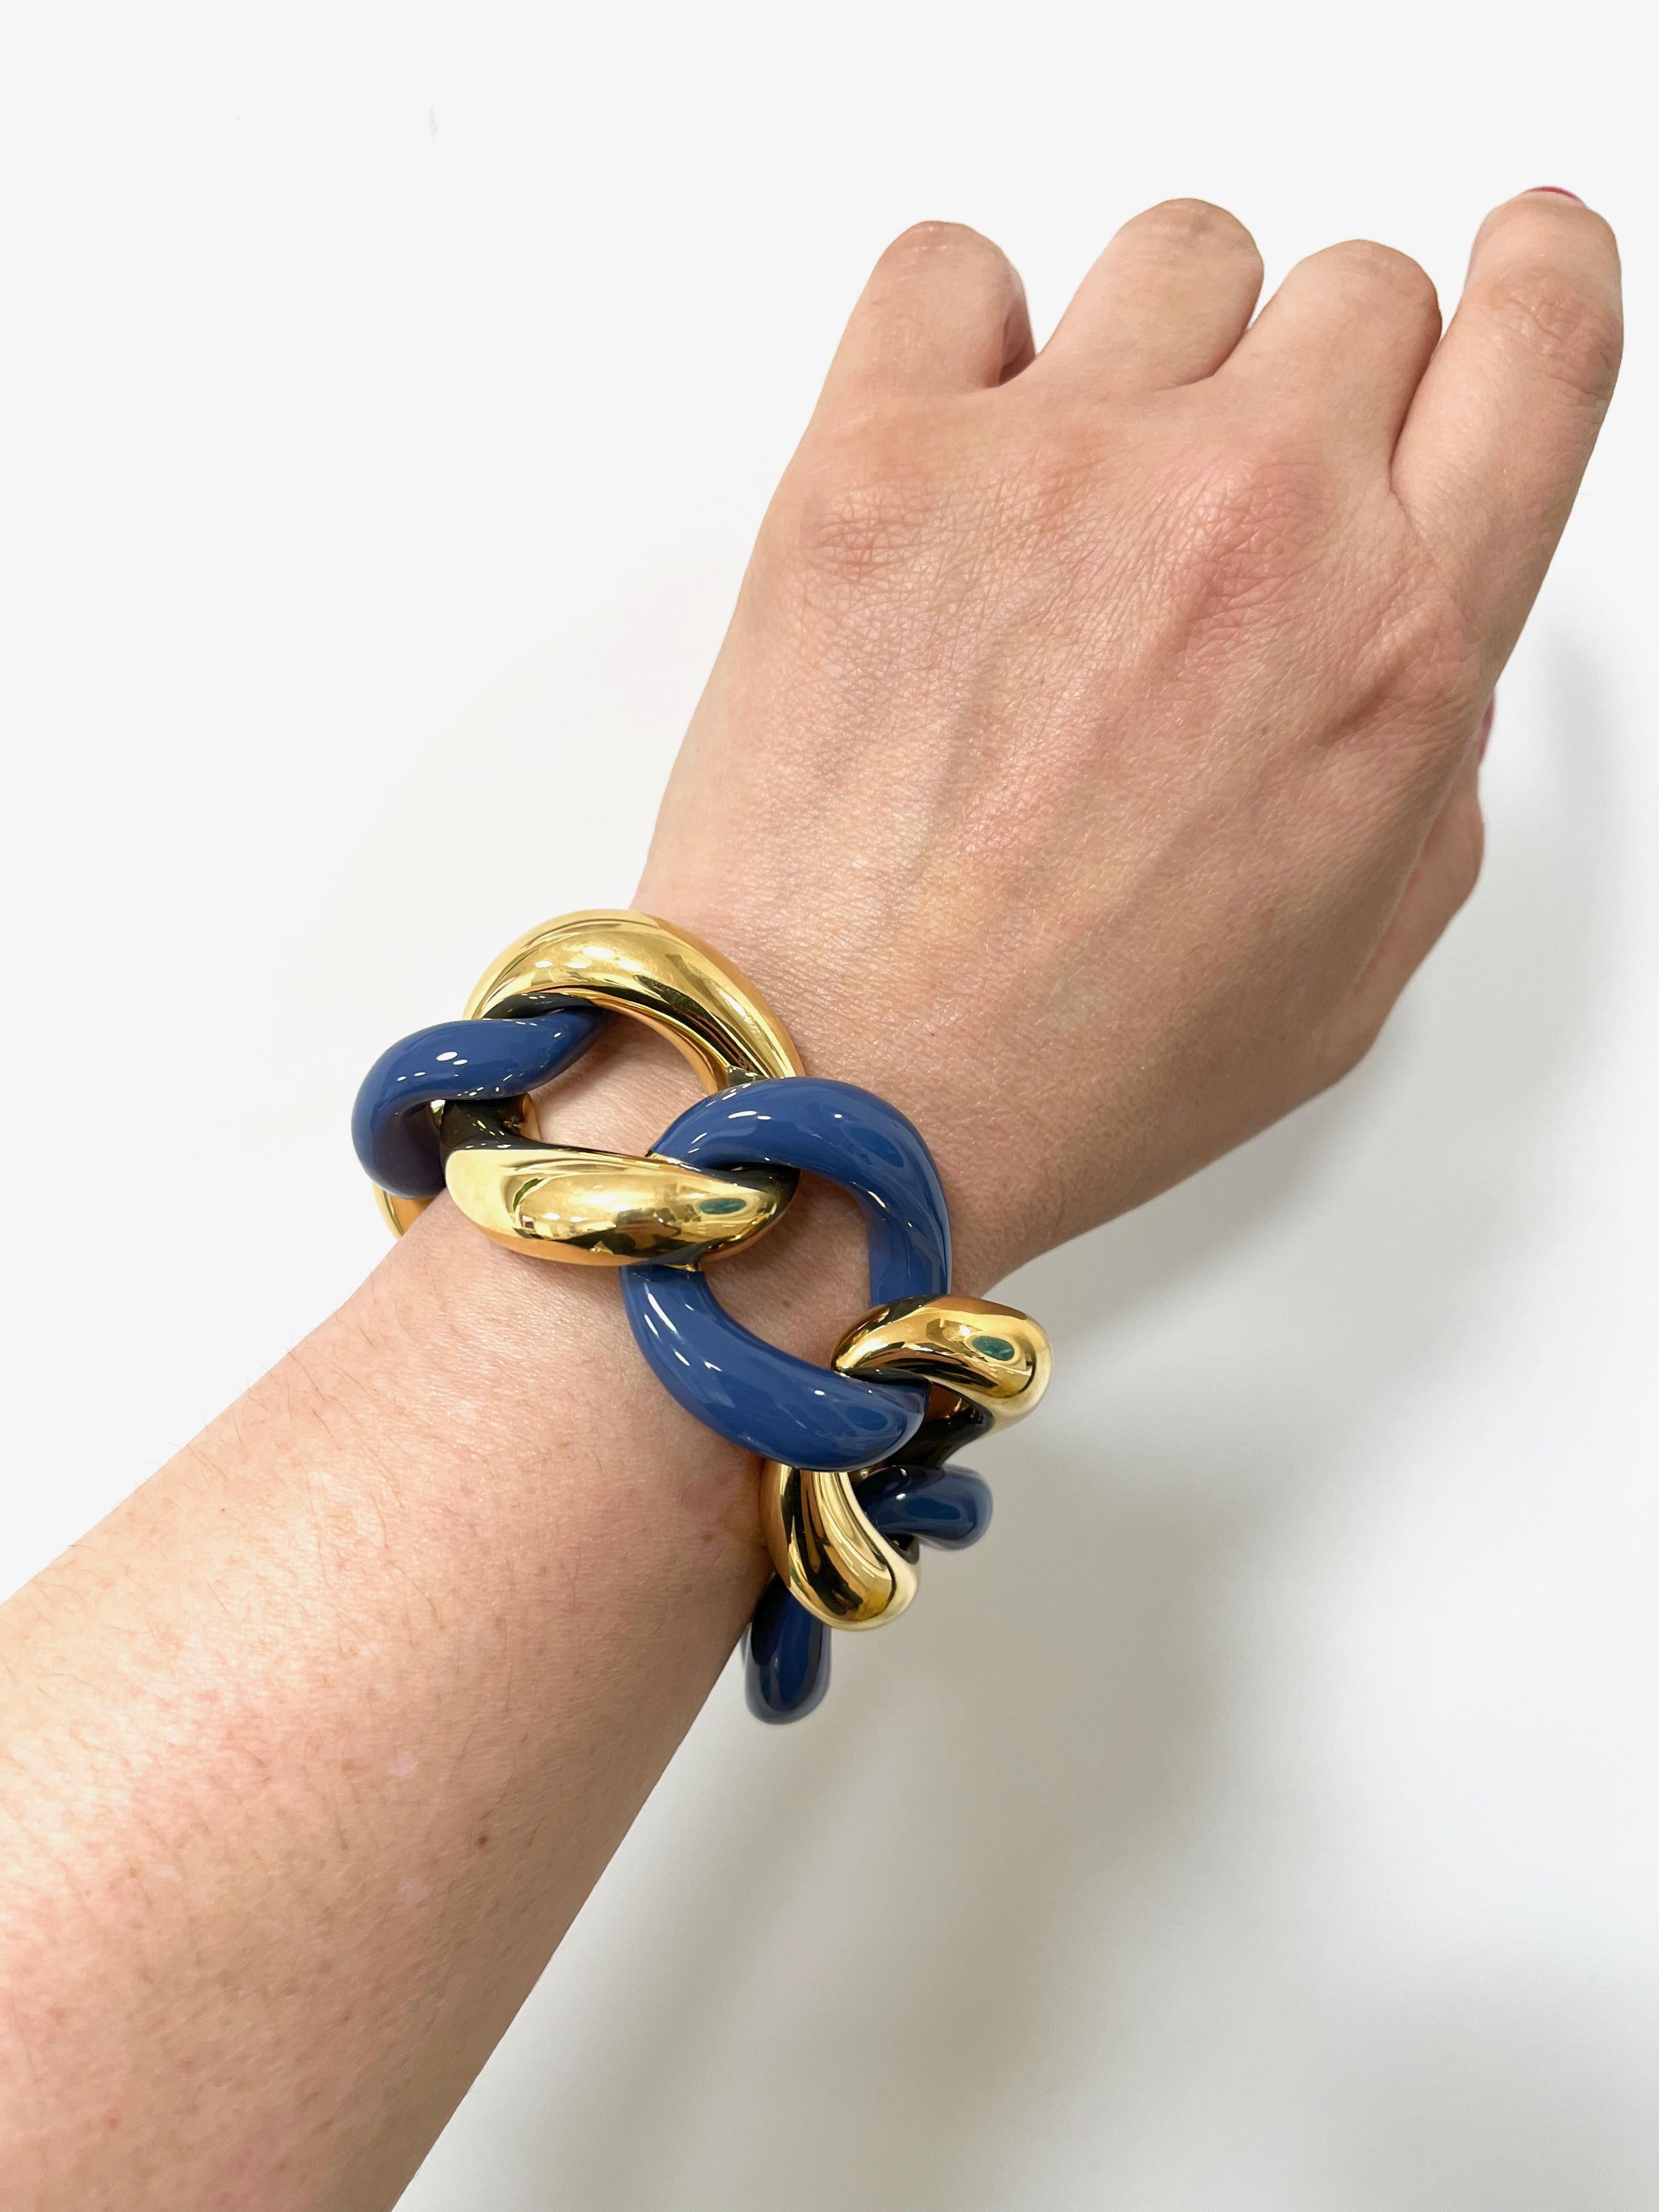 925 silver gold plated bracelet with bluejeans enamel.
This classic groumette bracelet is handmade in Italy.
Every link is hand painted.
The bracelet is designed by Fraleoni, an Italian jewelry brand based in Rome.
This model comes in different